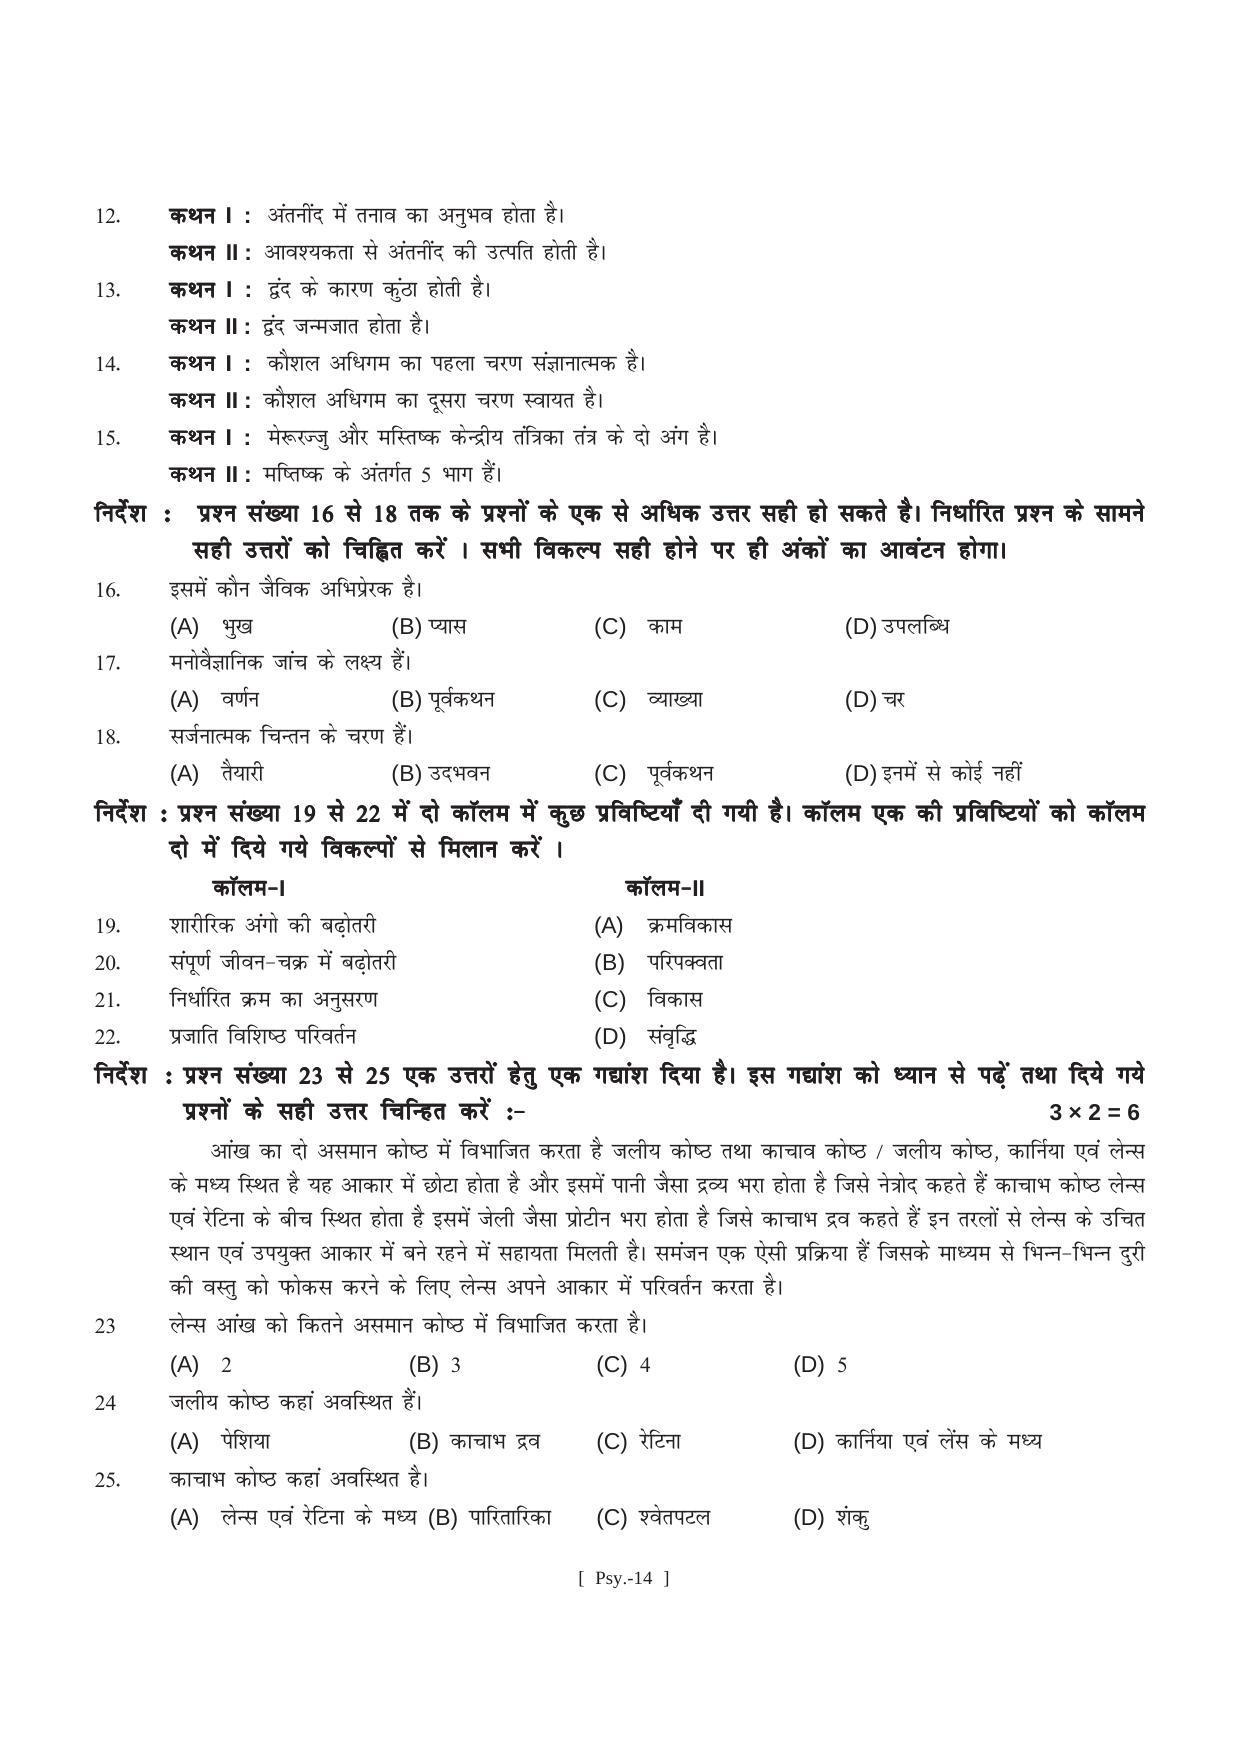 Bihar Board Class 11 Psychology (All Groups) Model Paper - Page 14